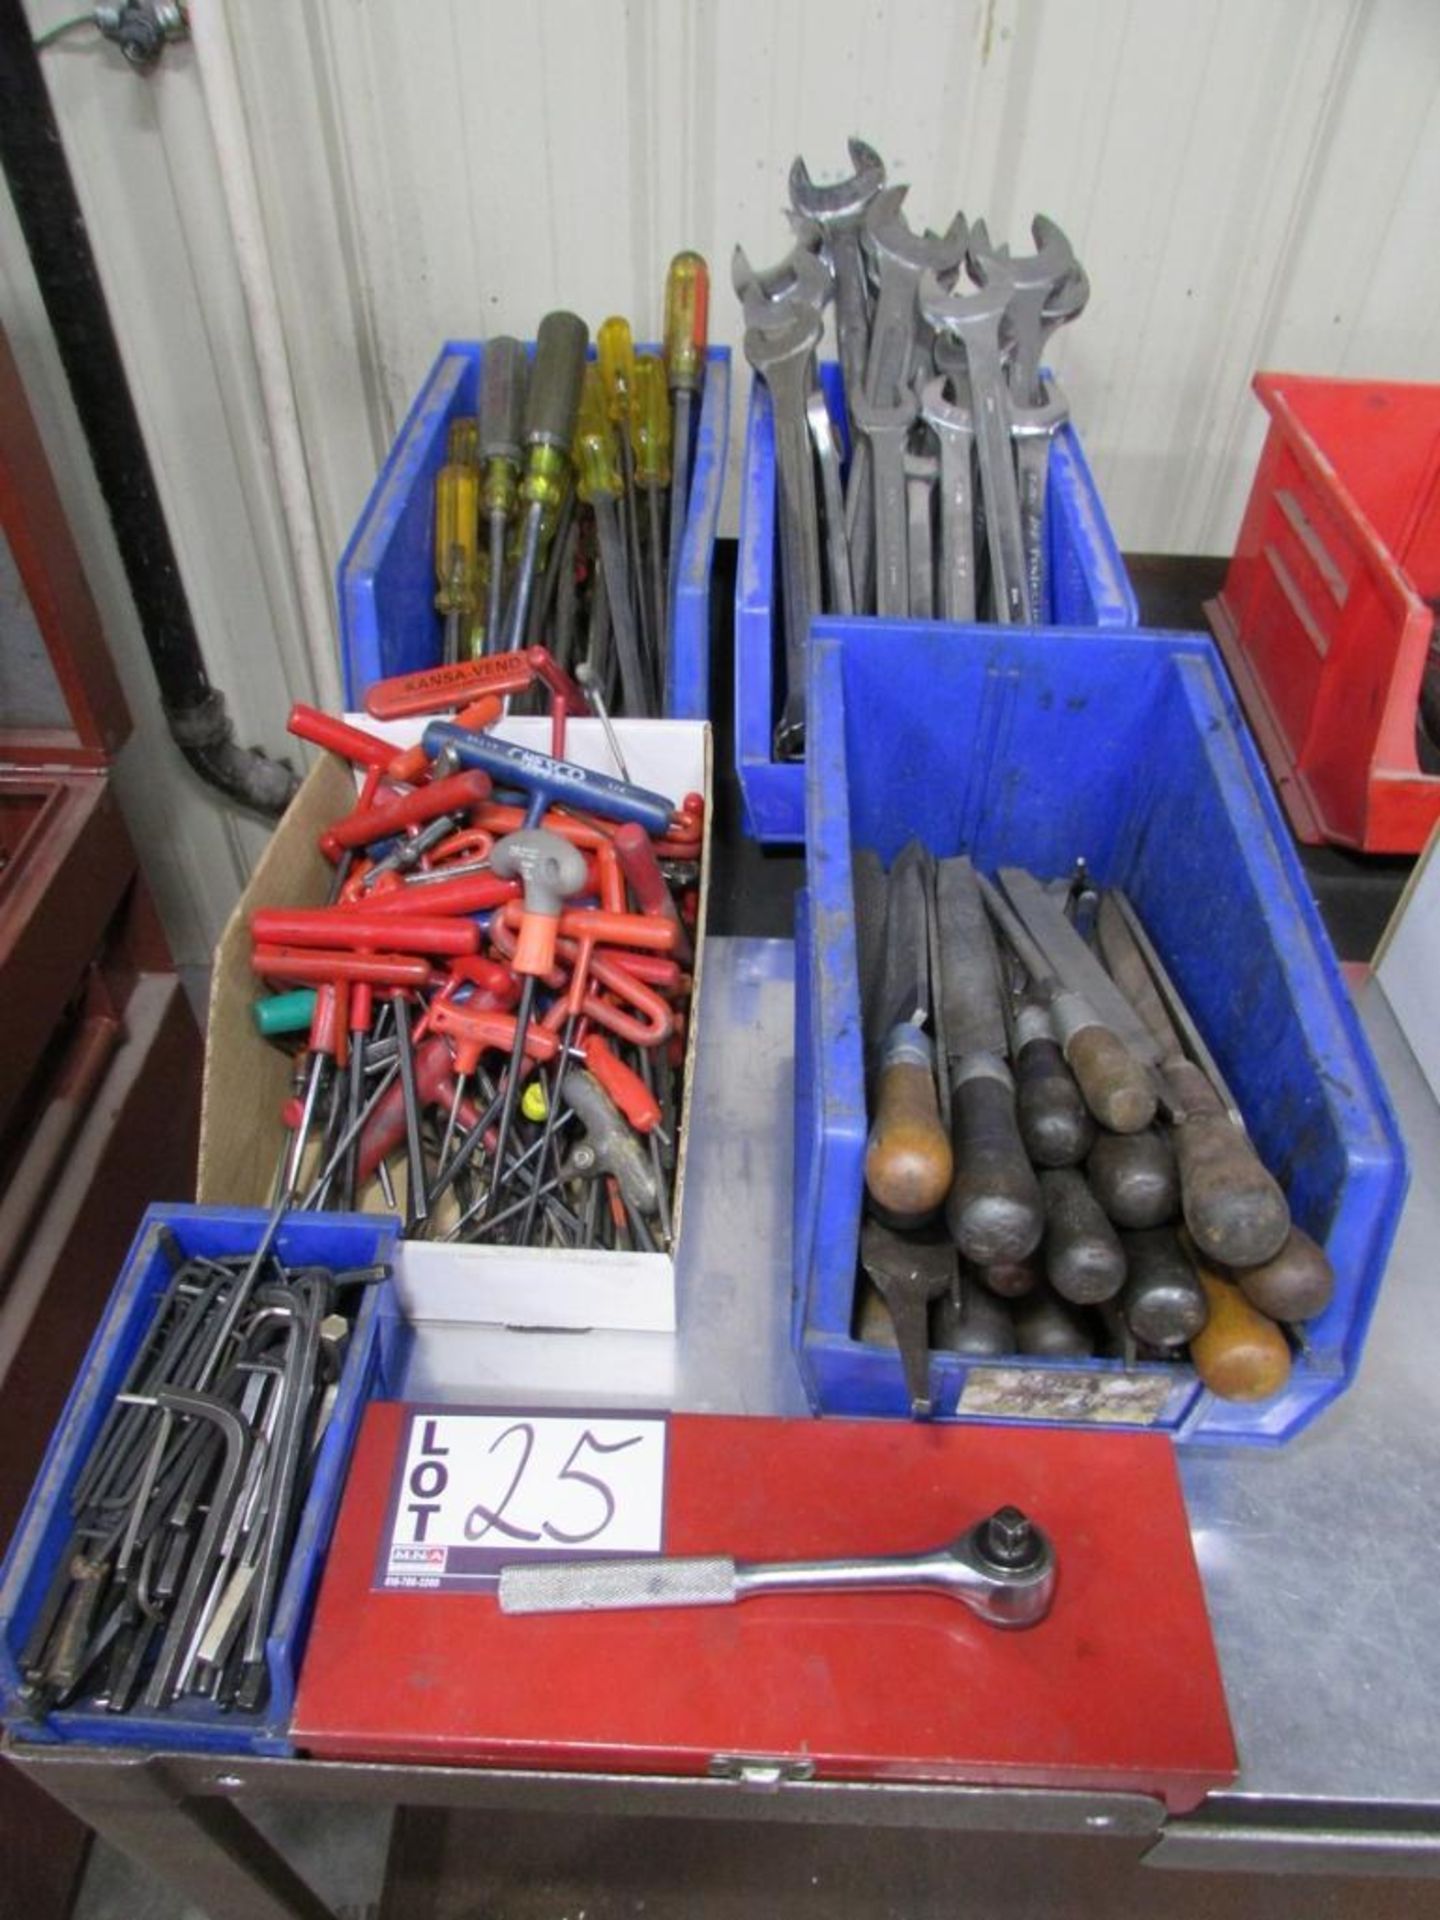 Assorted Hand Tools: Wrenches, Drivers, Files, Allen Wrenches, Ratchet, and Socket Set